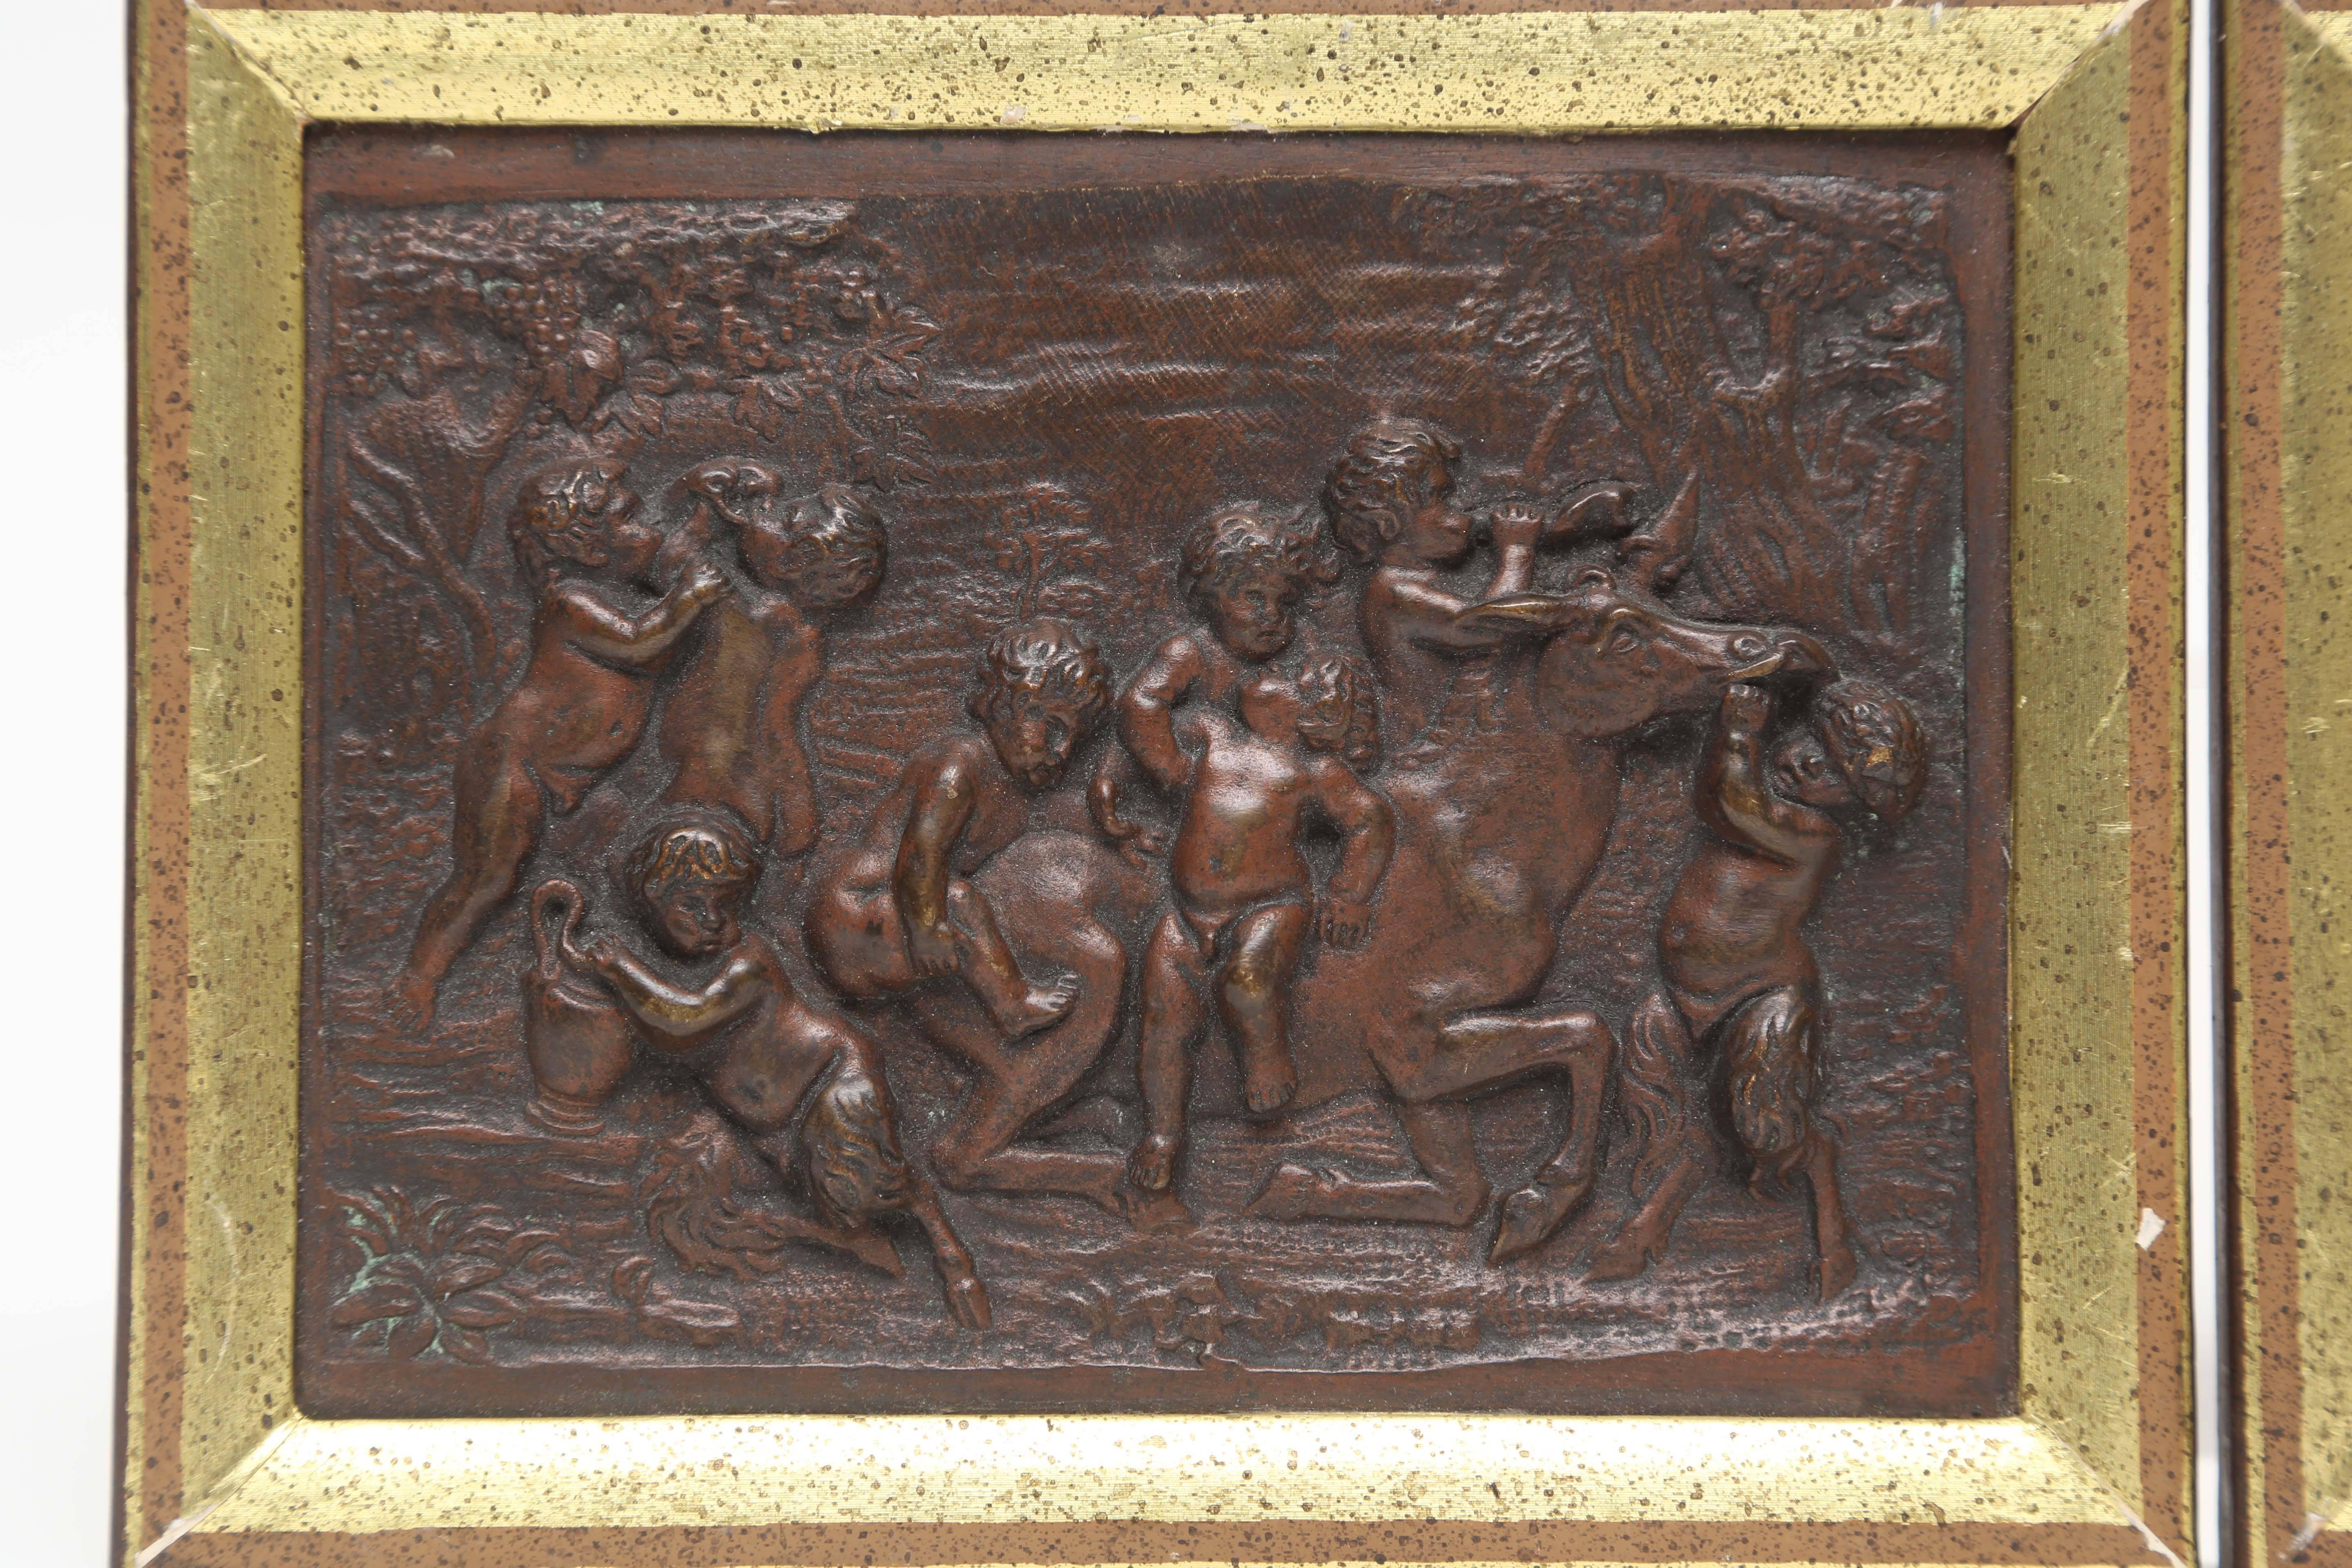 In the first plaquette the putti drink wine, eat grapes, make music and wrestle in a field with a round temple in the background. Signed CLODION

In the second plaquette, young satyrs and putti drink wine and play with a seated horse in a forest